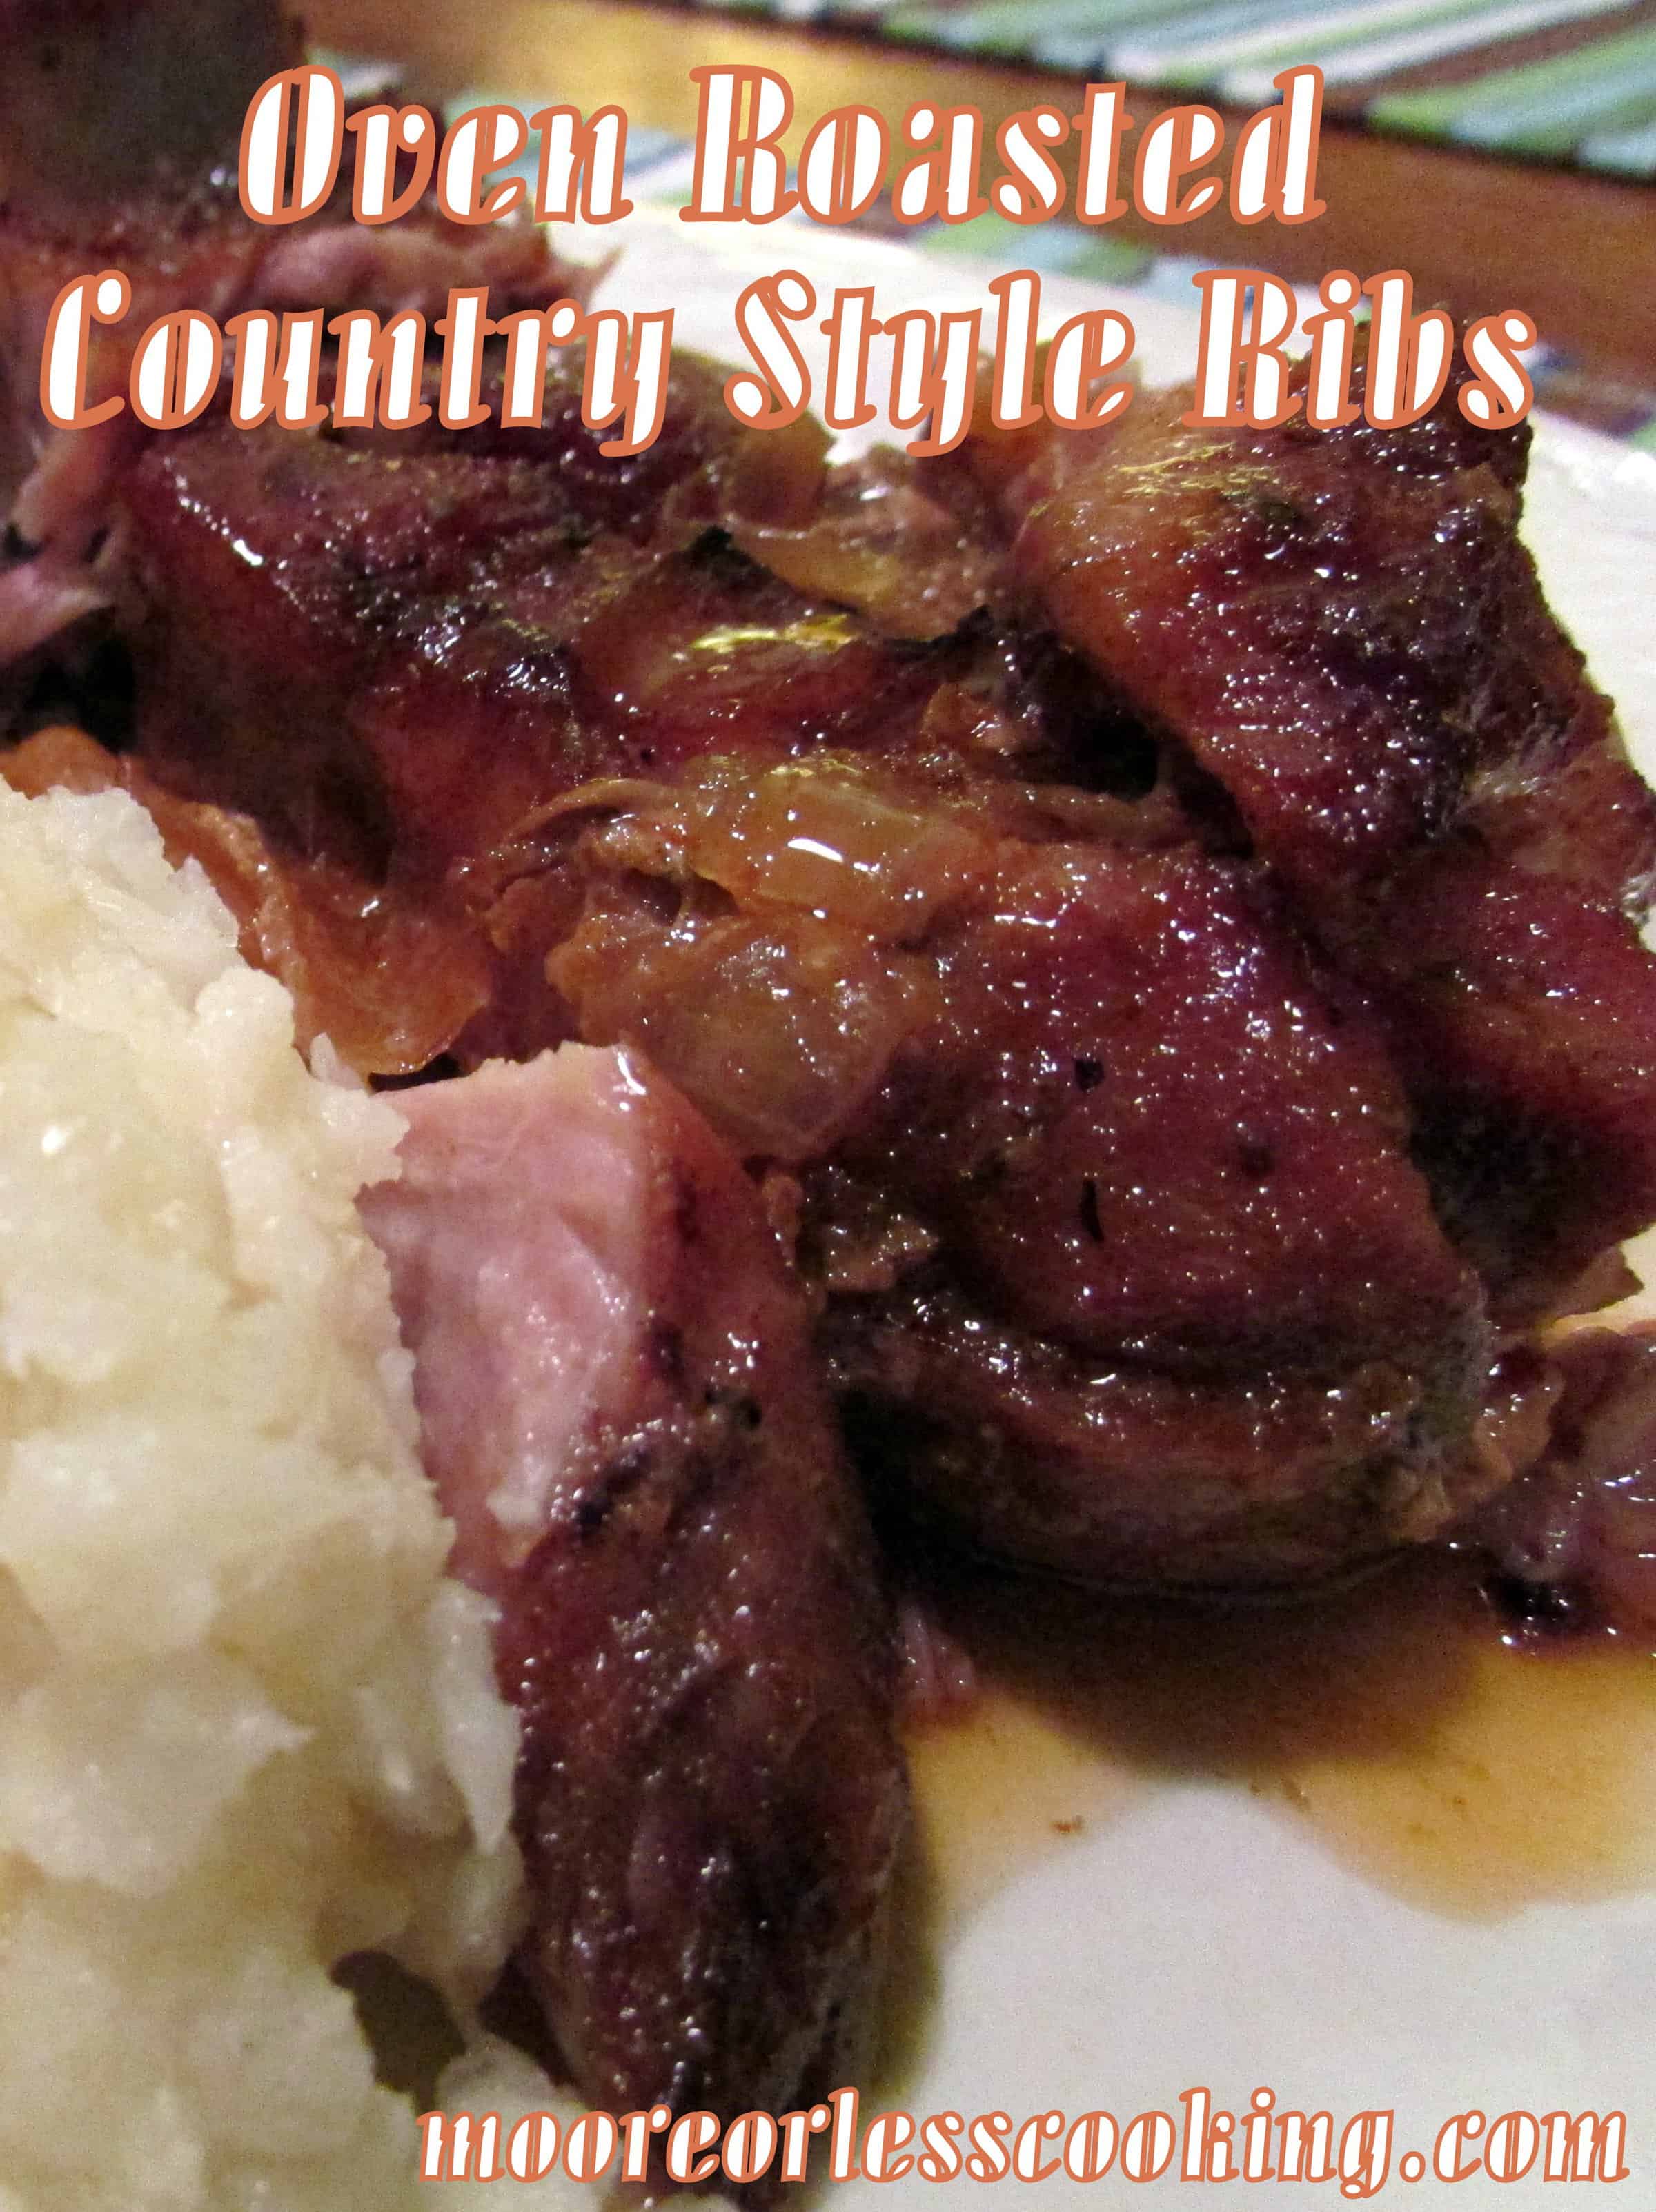 Oven Roasted Country Style Ribs and a Cookbook and Spice Giveaway